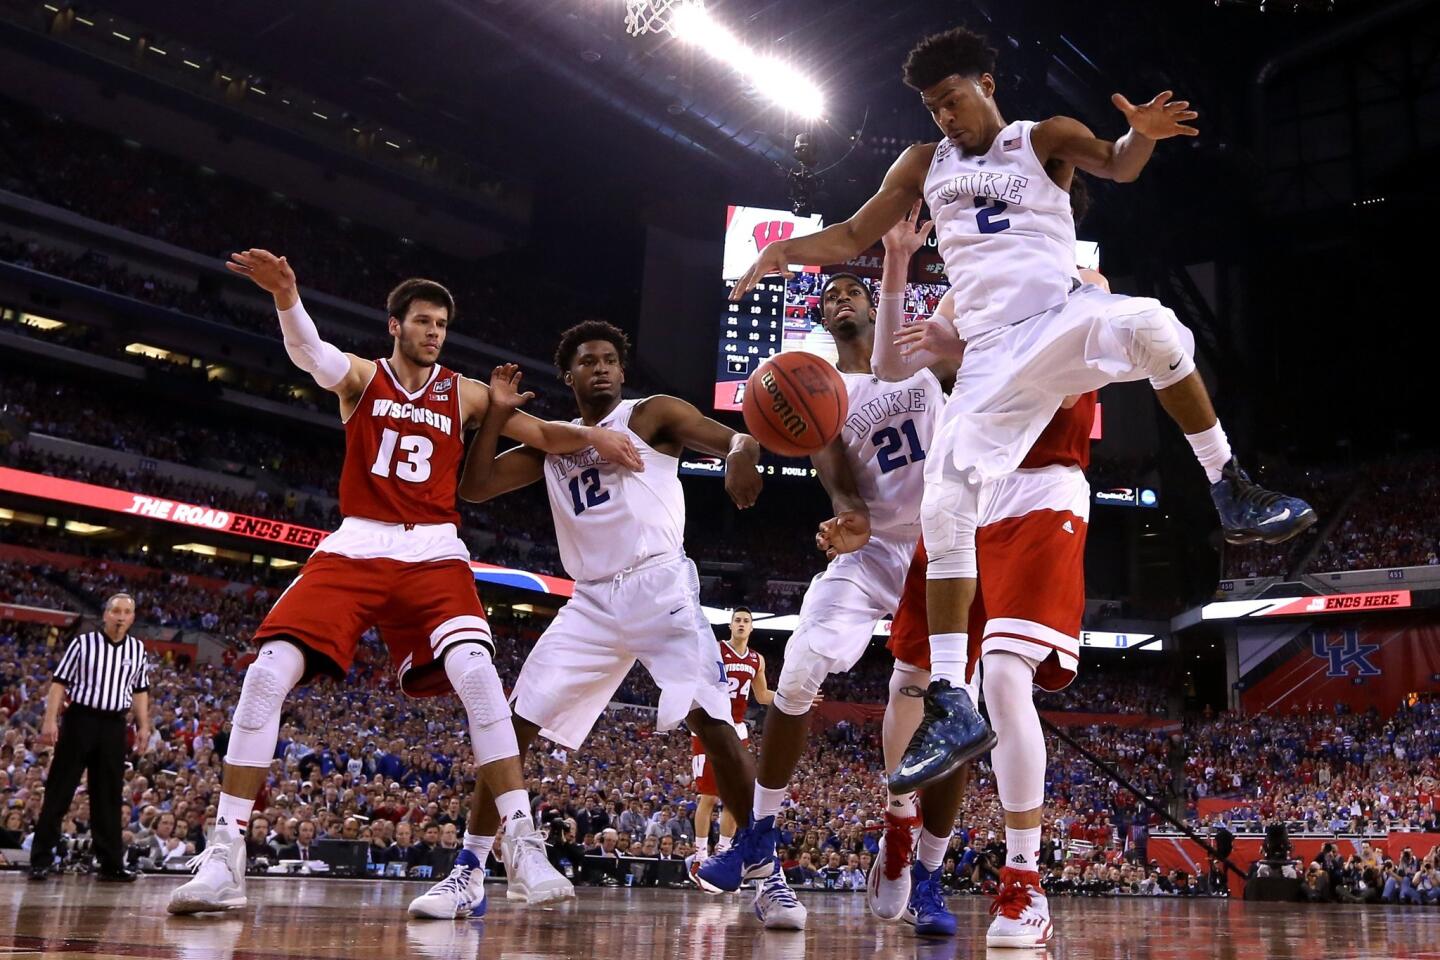 Duke's Quinn Cook goes for a loose ball against Frank Kaminsky in the second half.